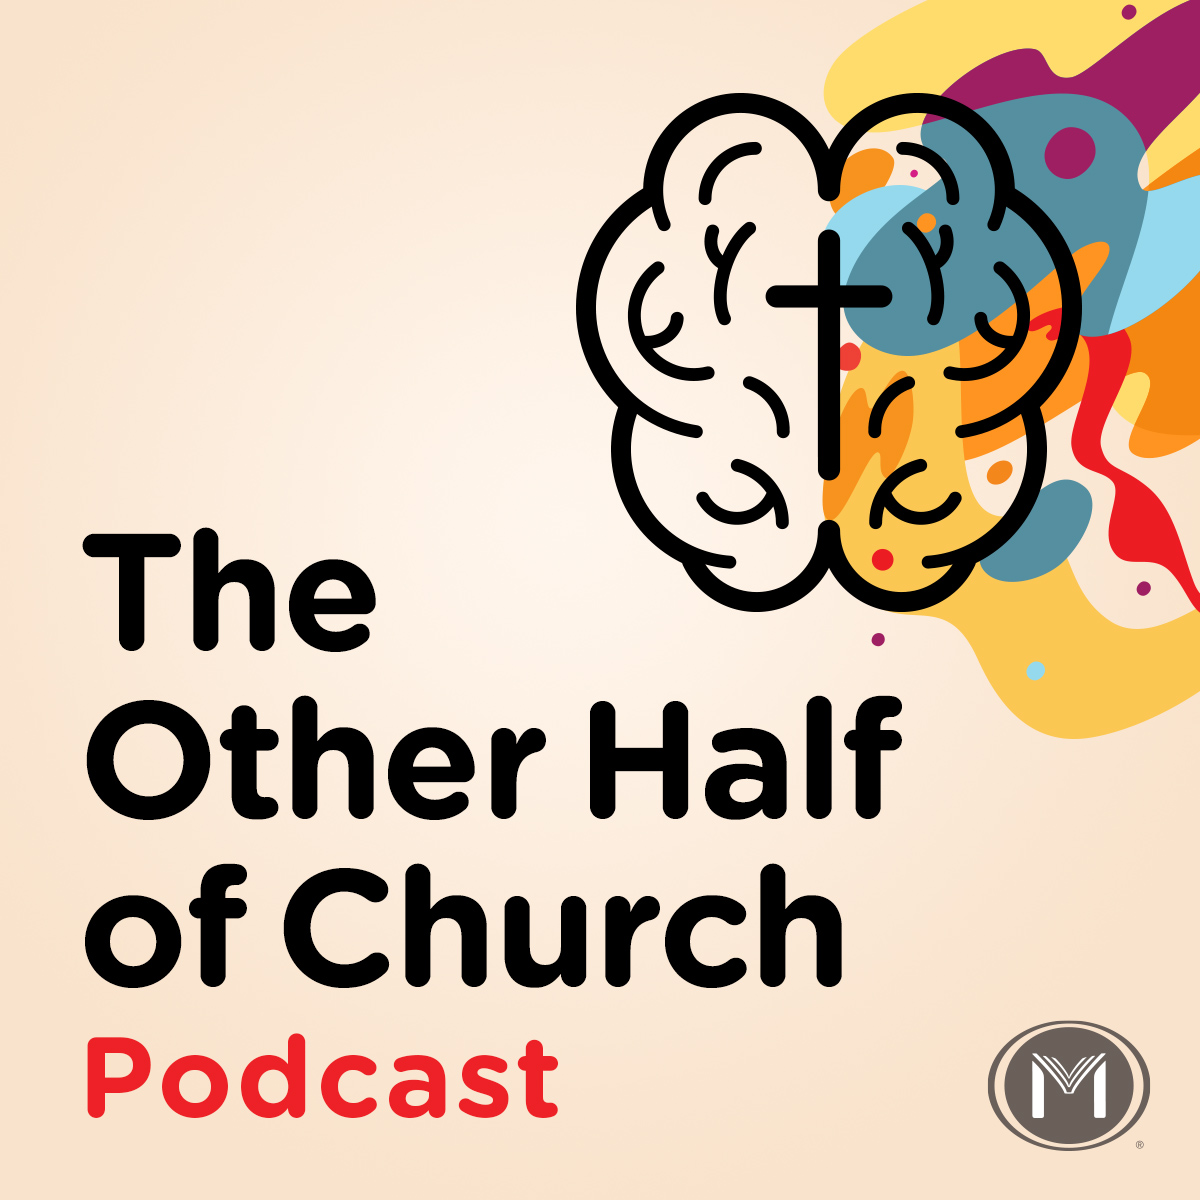 The Other Half of Church | Right Brain, Left Brain and Why It Matters For the Church